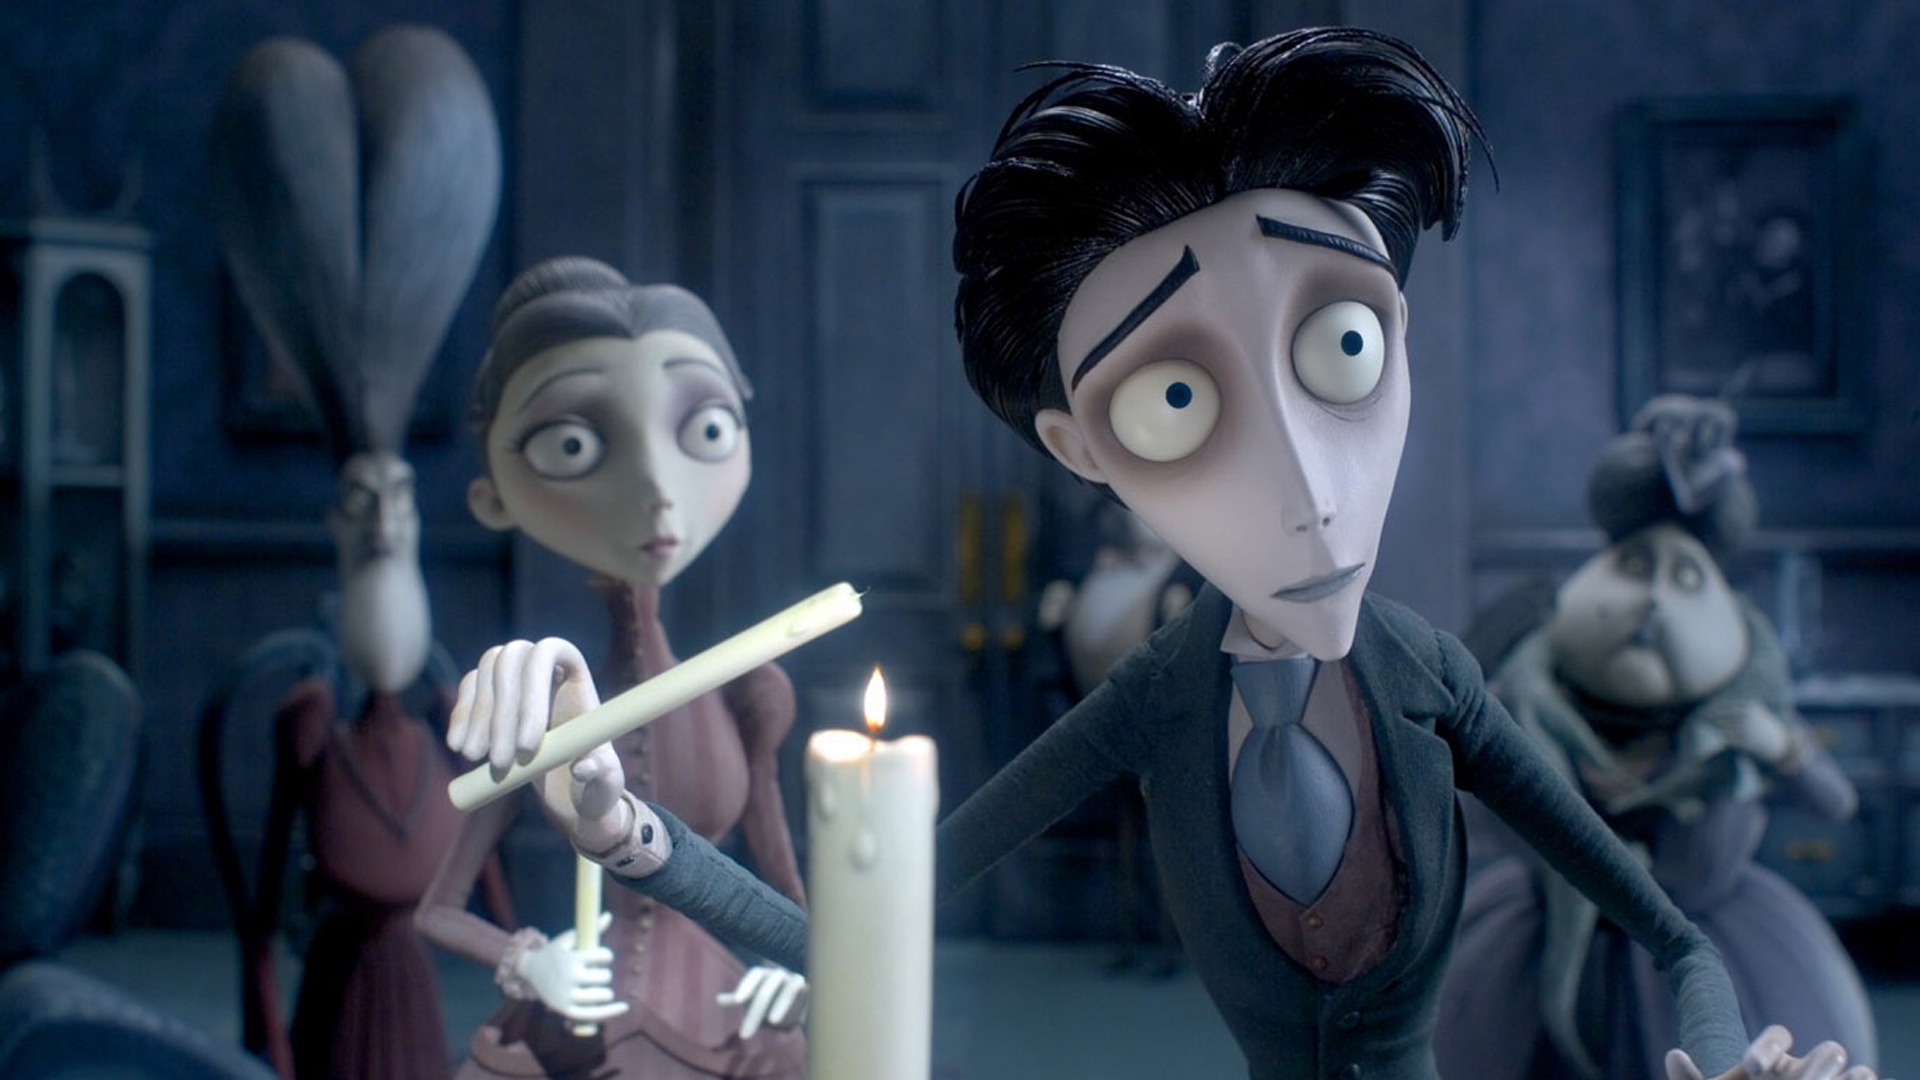 Corpse Bride for 1920 x 1080 HDTV 1080p resolution